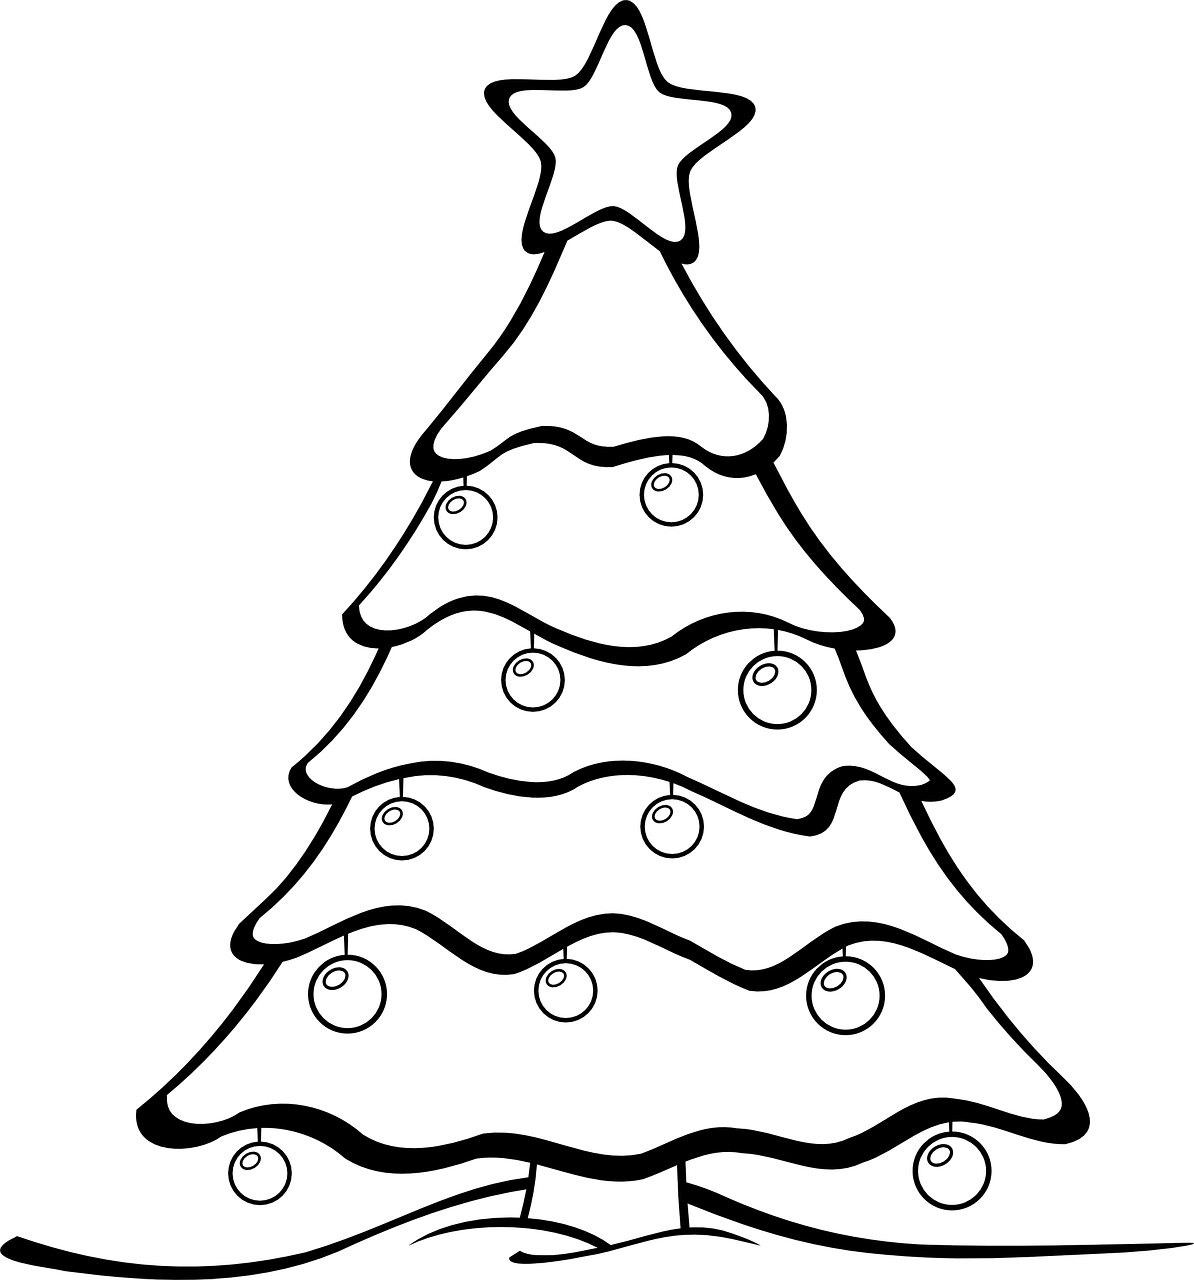 Easy Christmas Tree Drawing Coloring Page